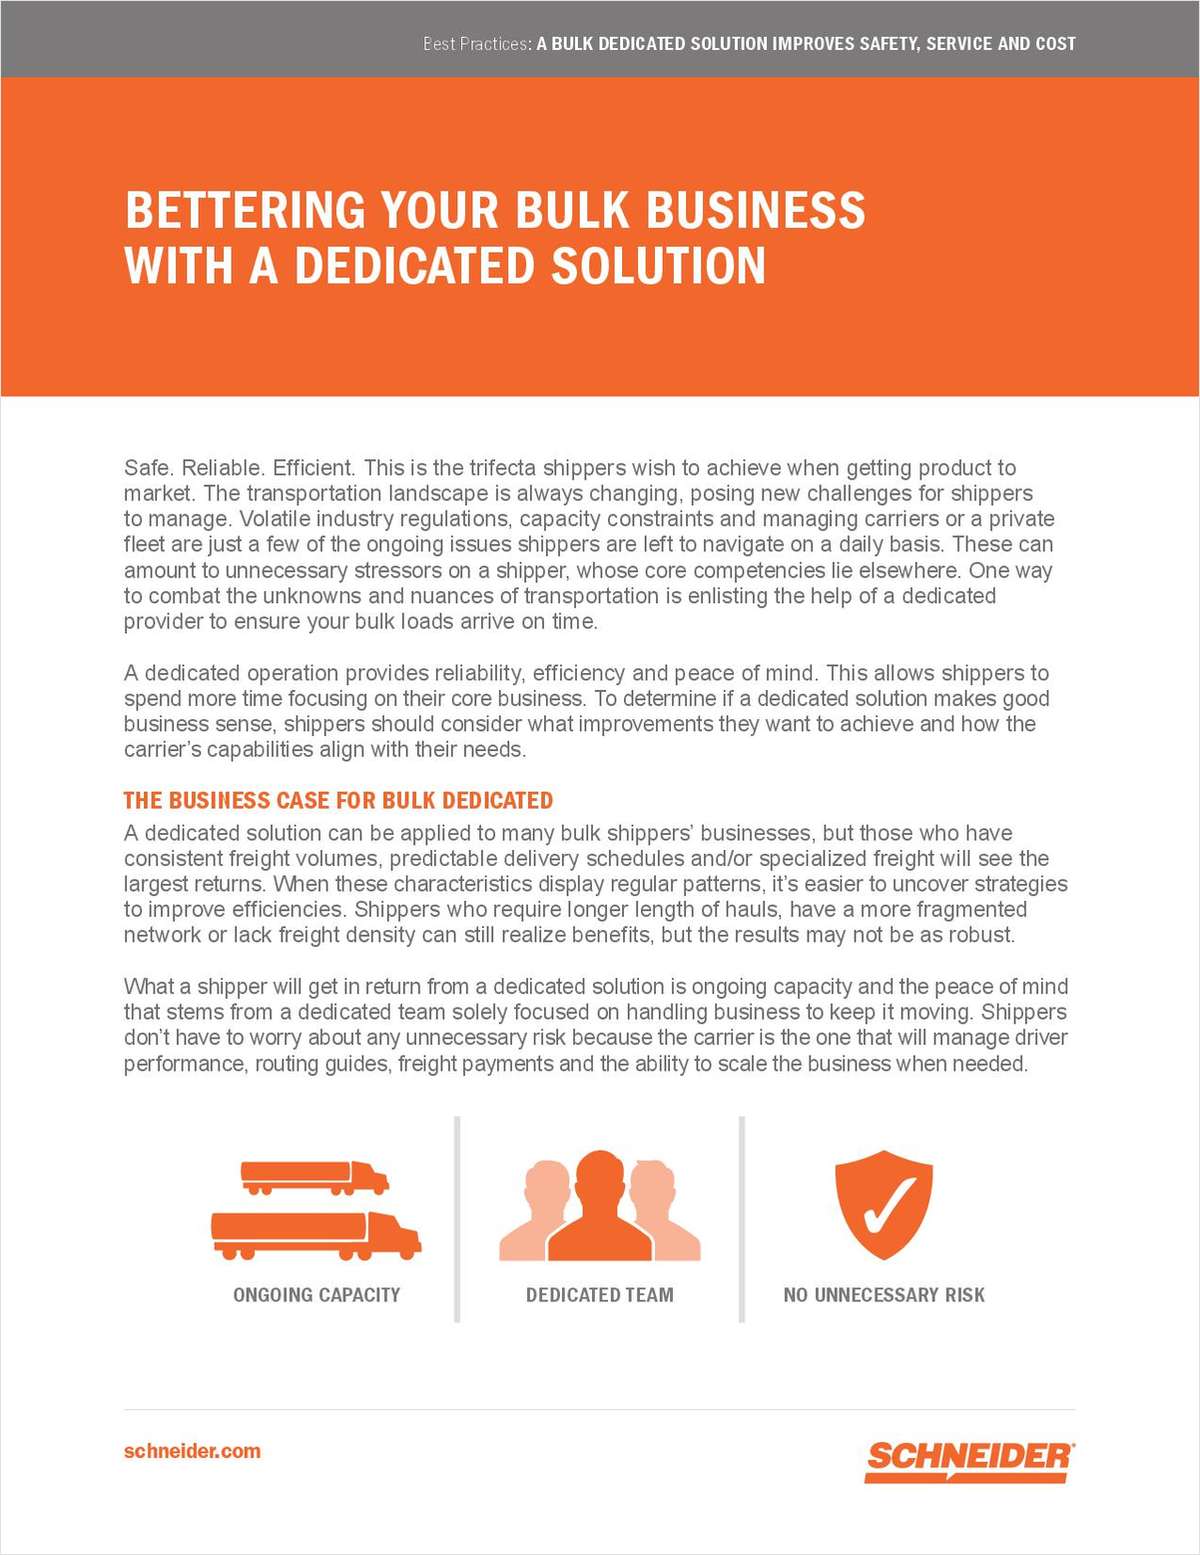 The 8 boxes to check when choosing a Dedicated Bulk Carrier for your business